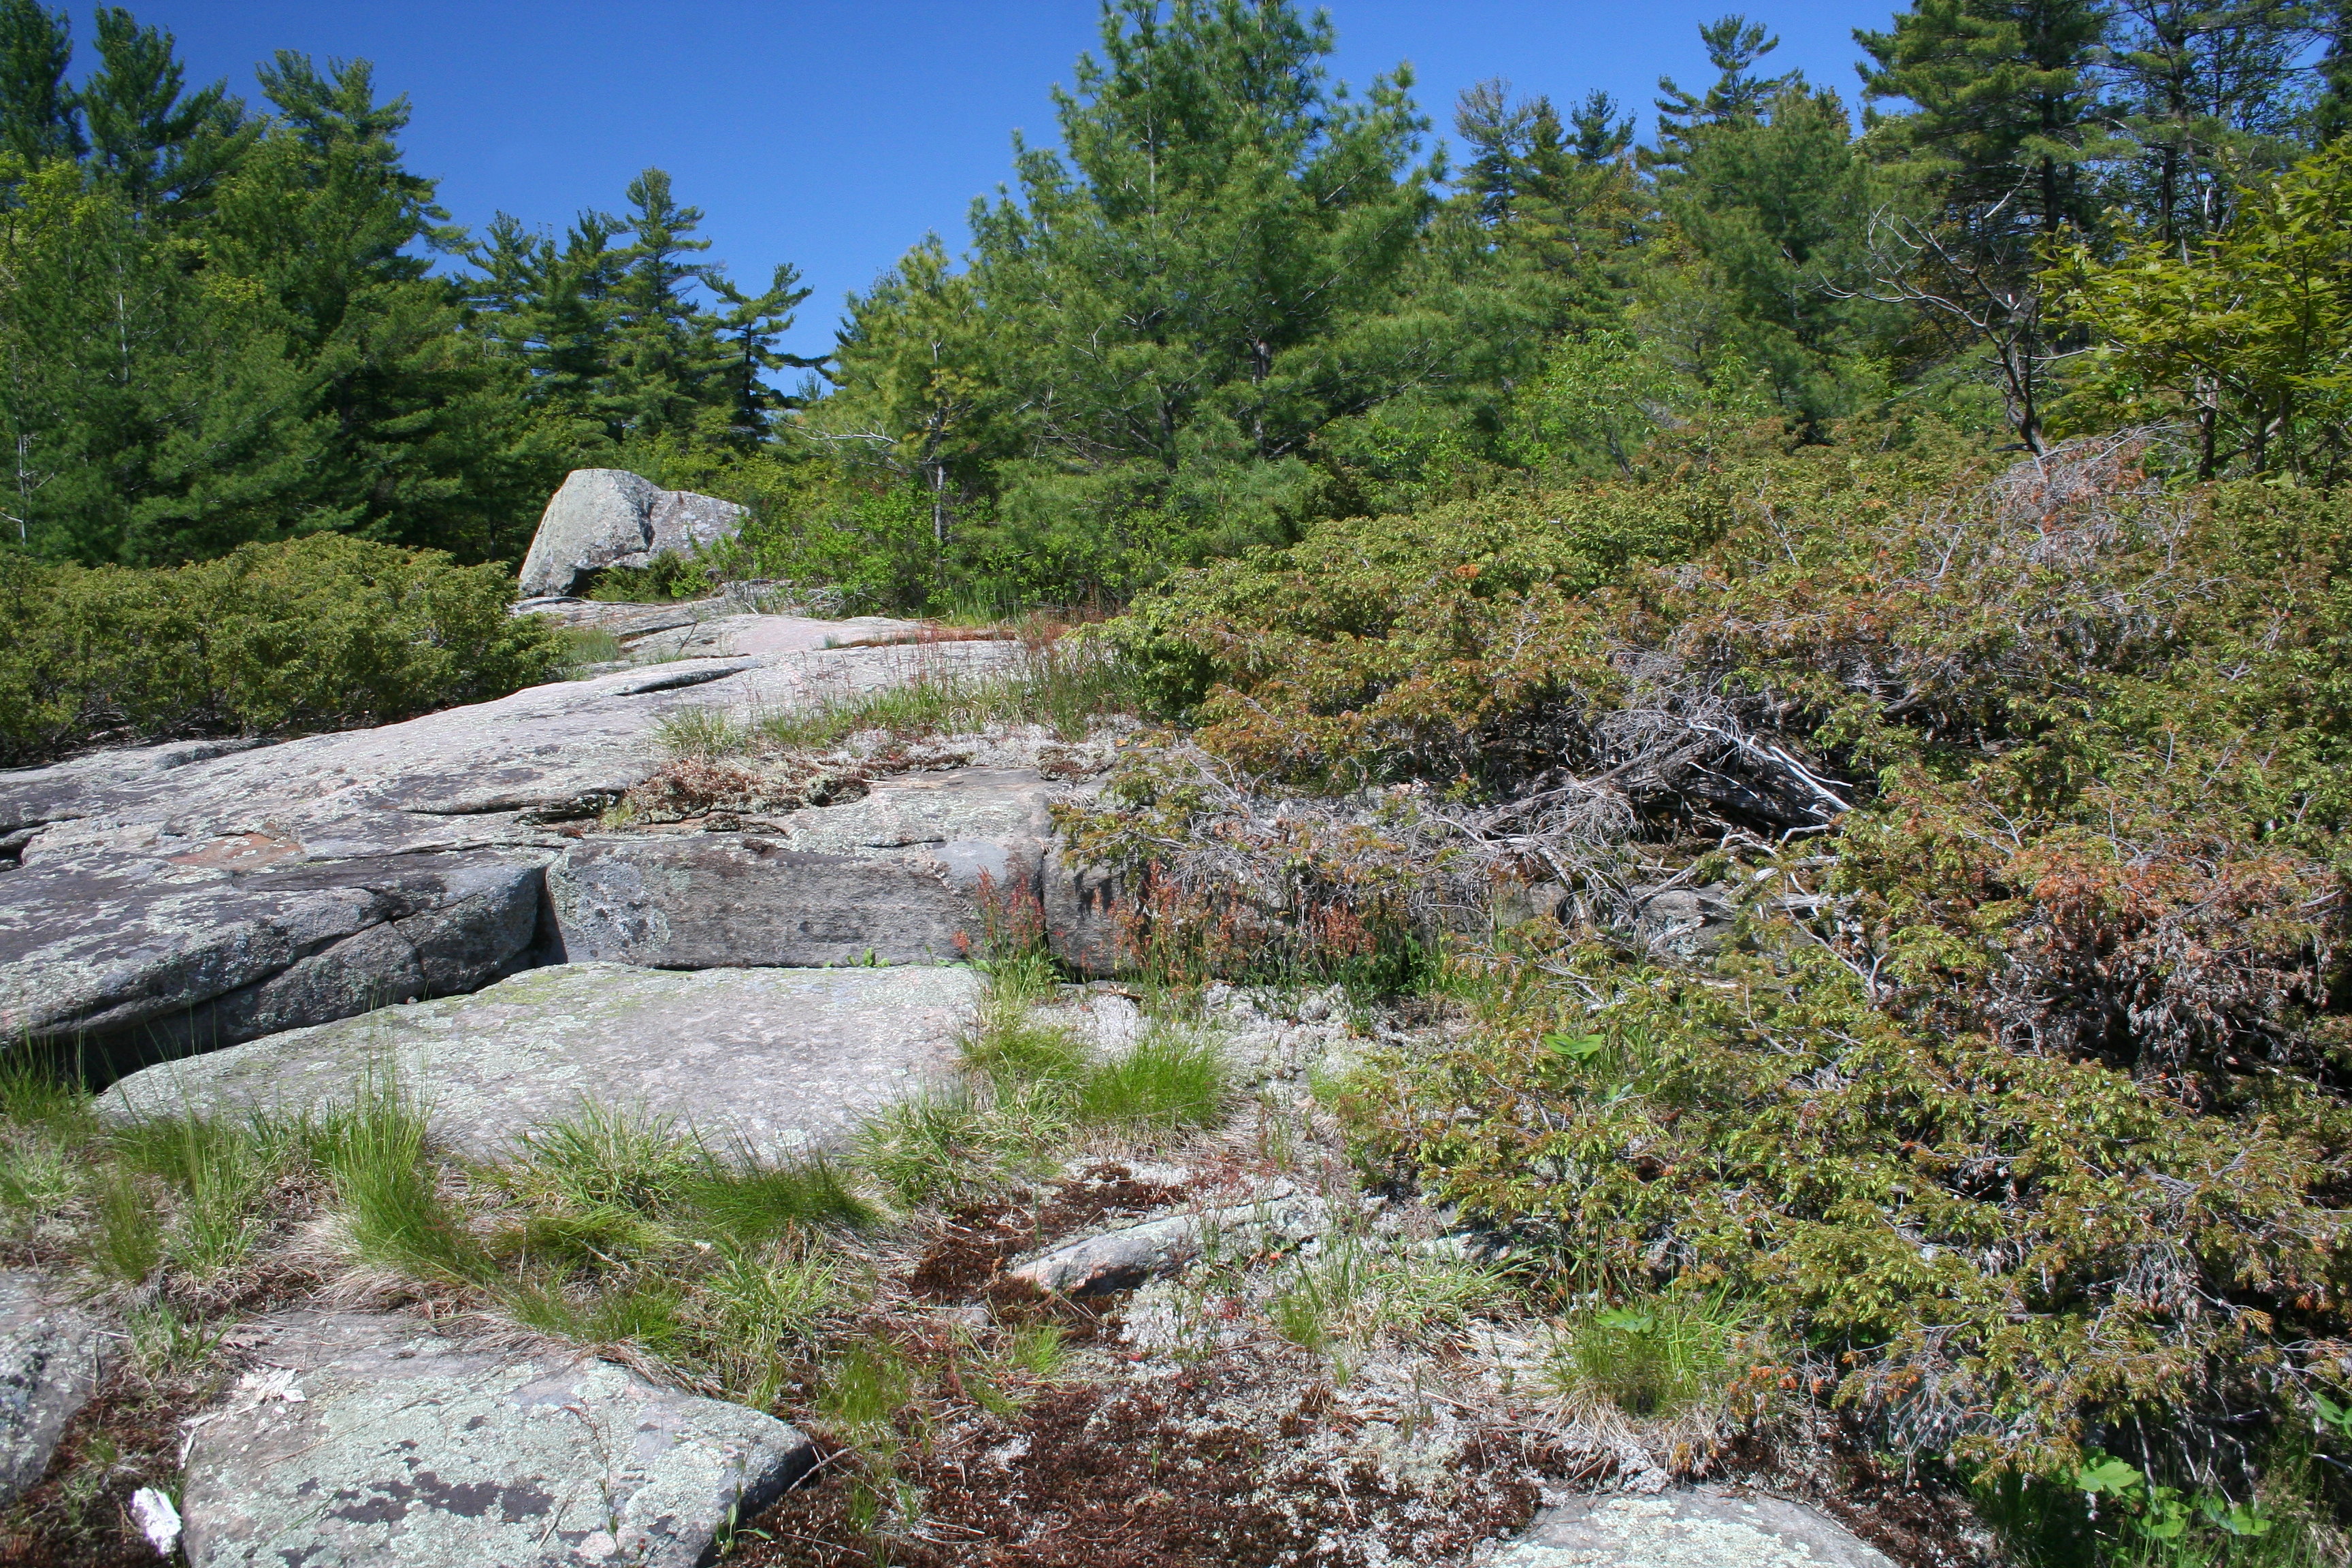 A photograph of a rocky Canadian Shield landscape that is inhabited by species at risk such as Common Five-lined Skink, Eastern Foxsnake and Gray Ratsnake